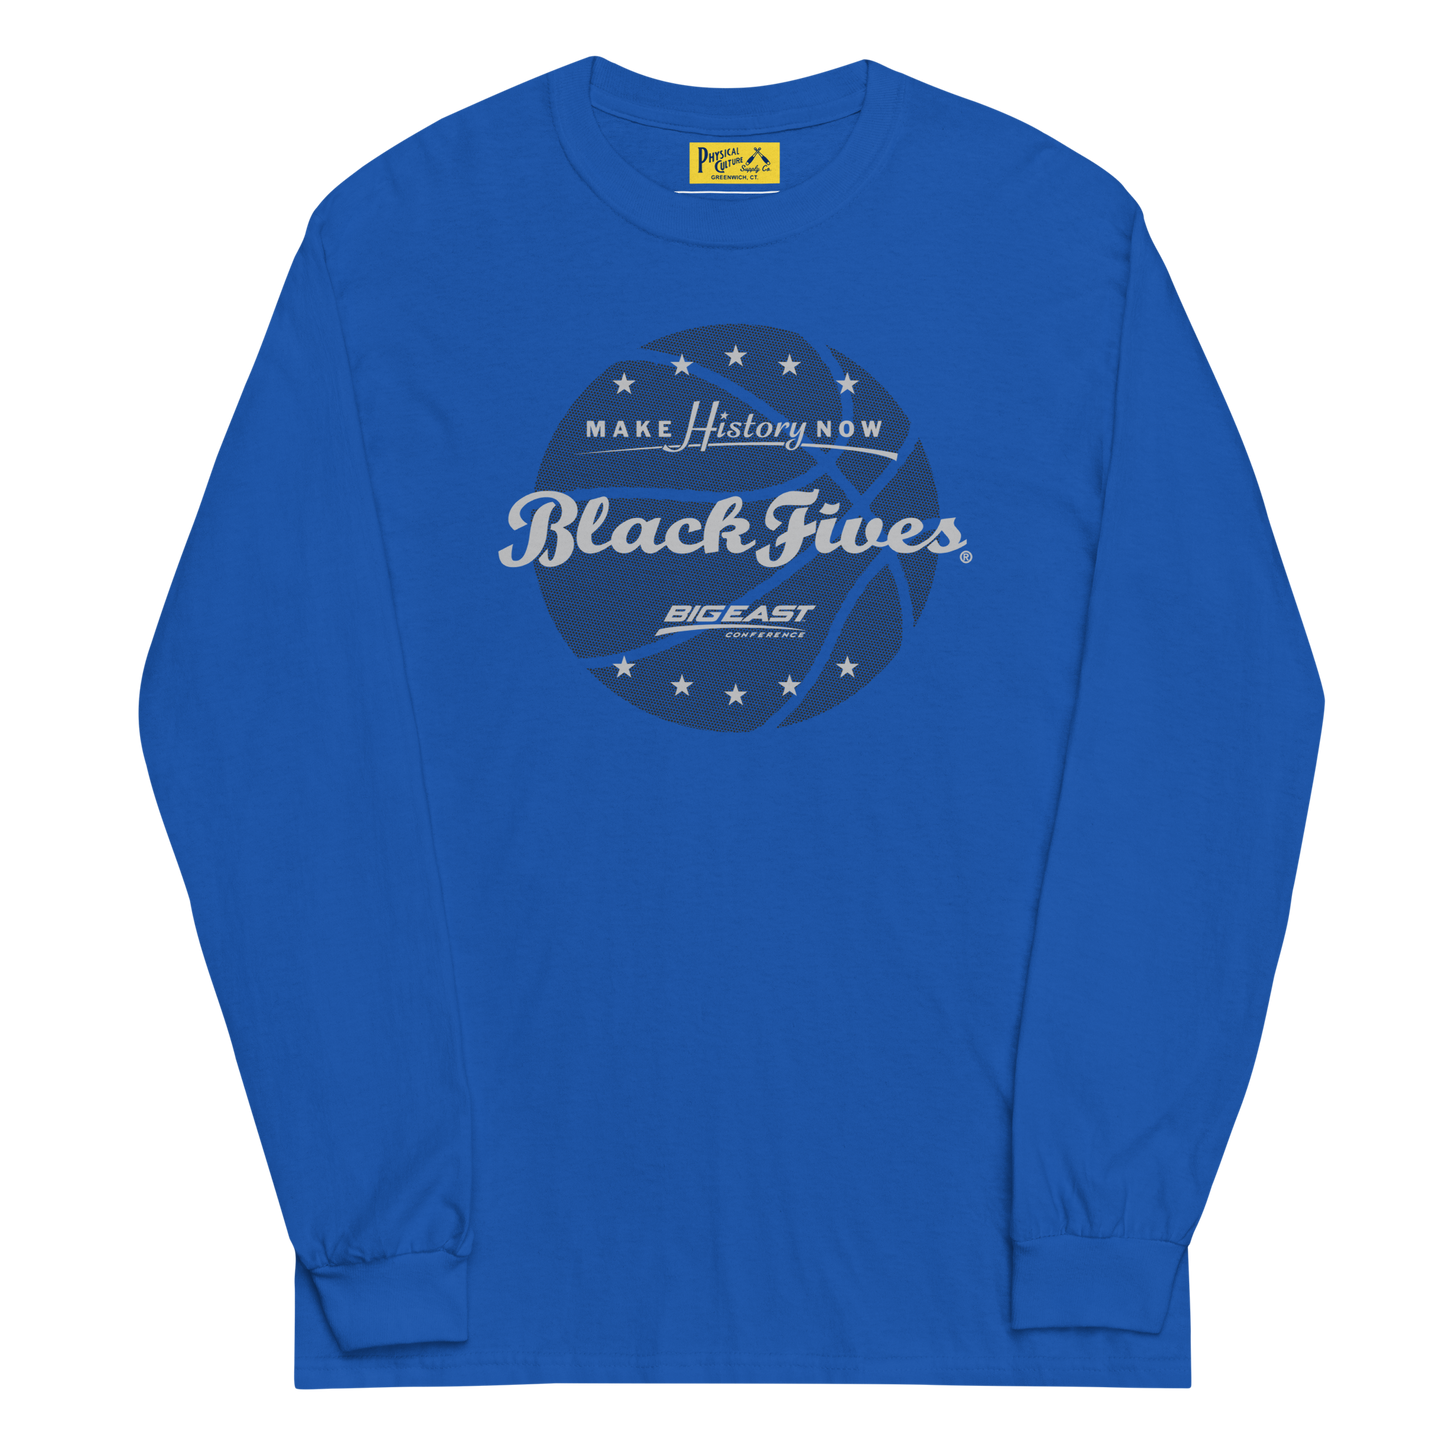 Limited Edition Black Fives x Big East BHM Cotton Long Sleeve